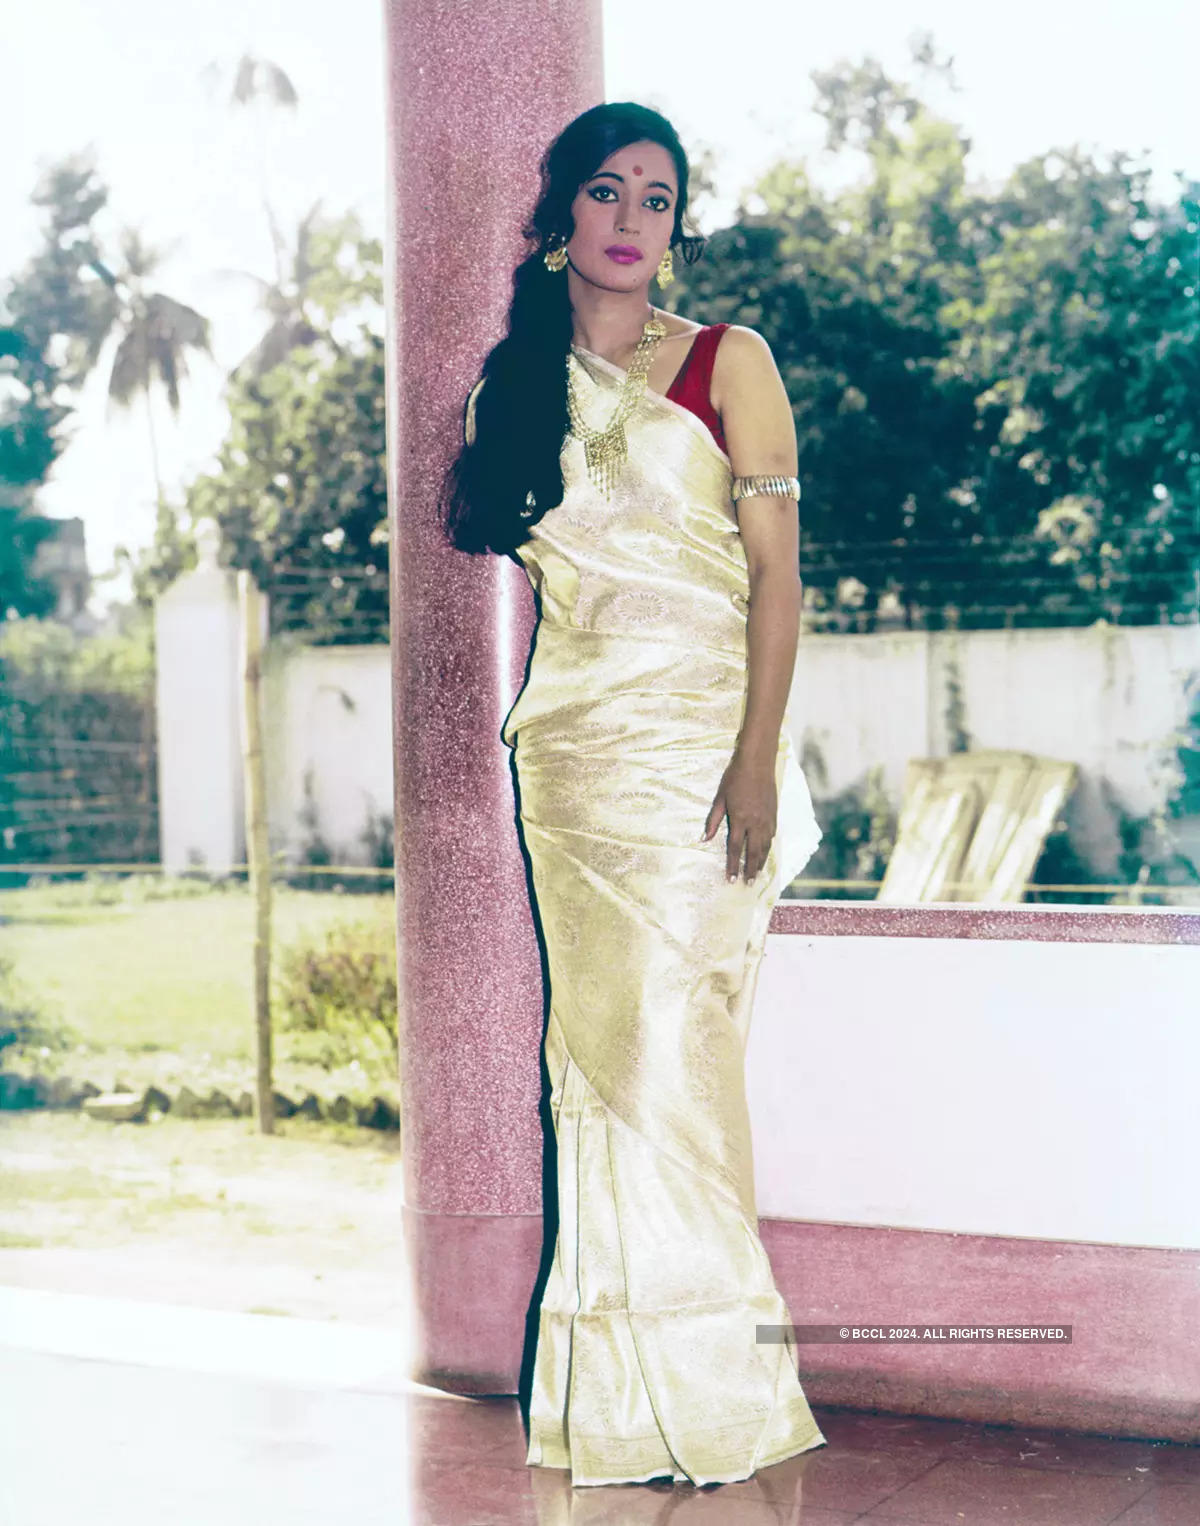 #GoldenFrames: Suchitra Sen who revolutionised woman-centric movies in the 60s